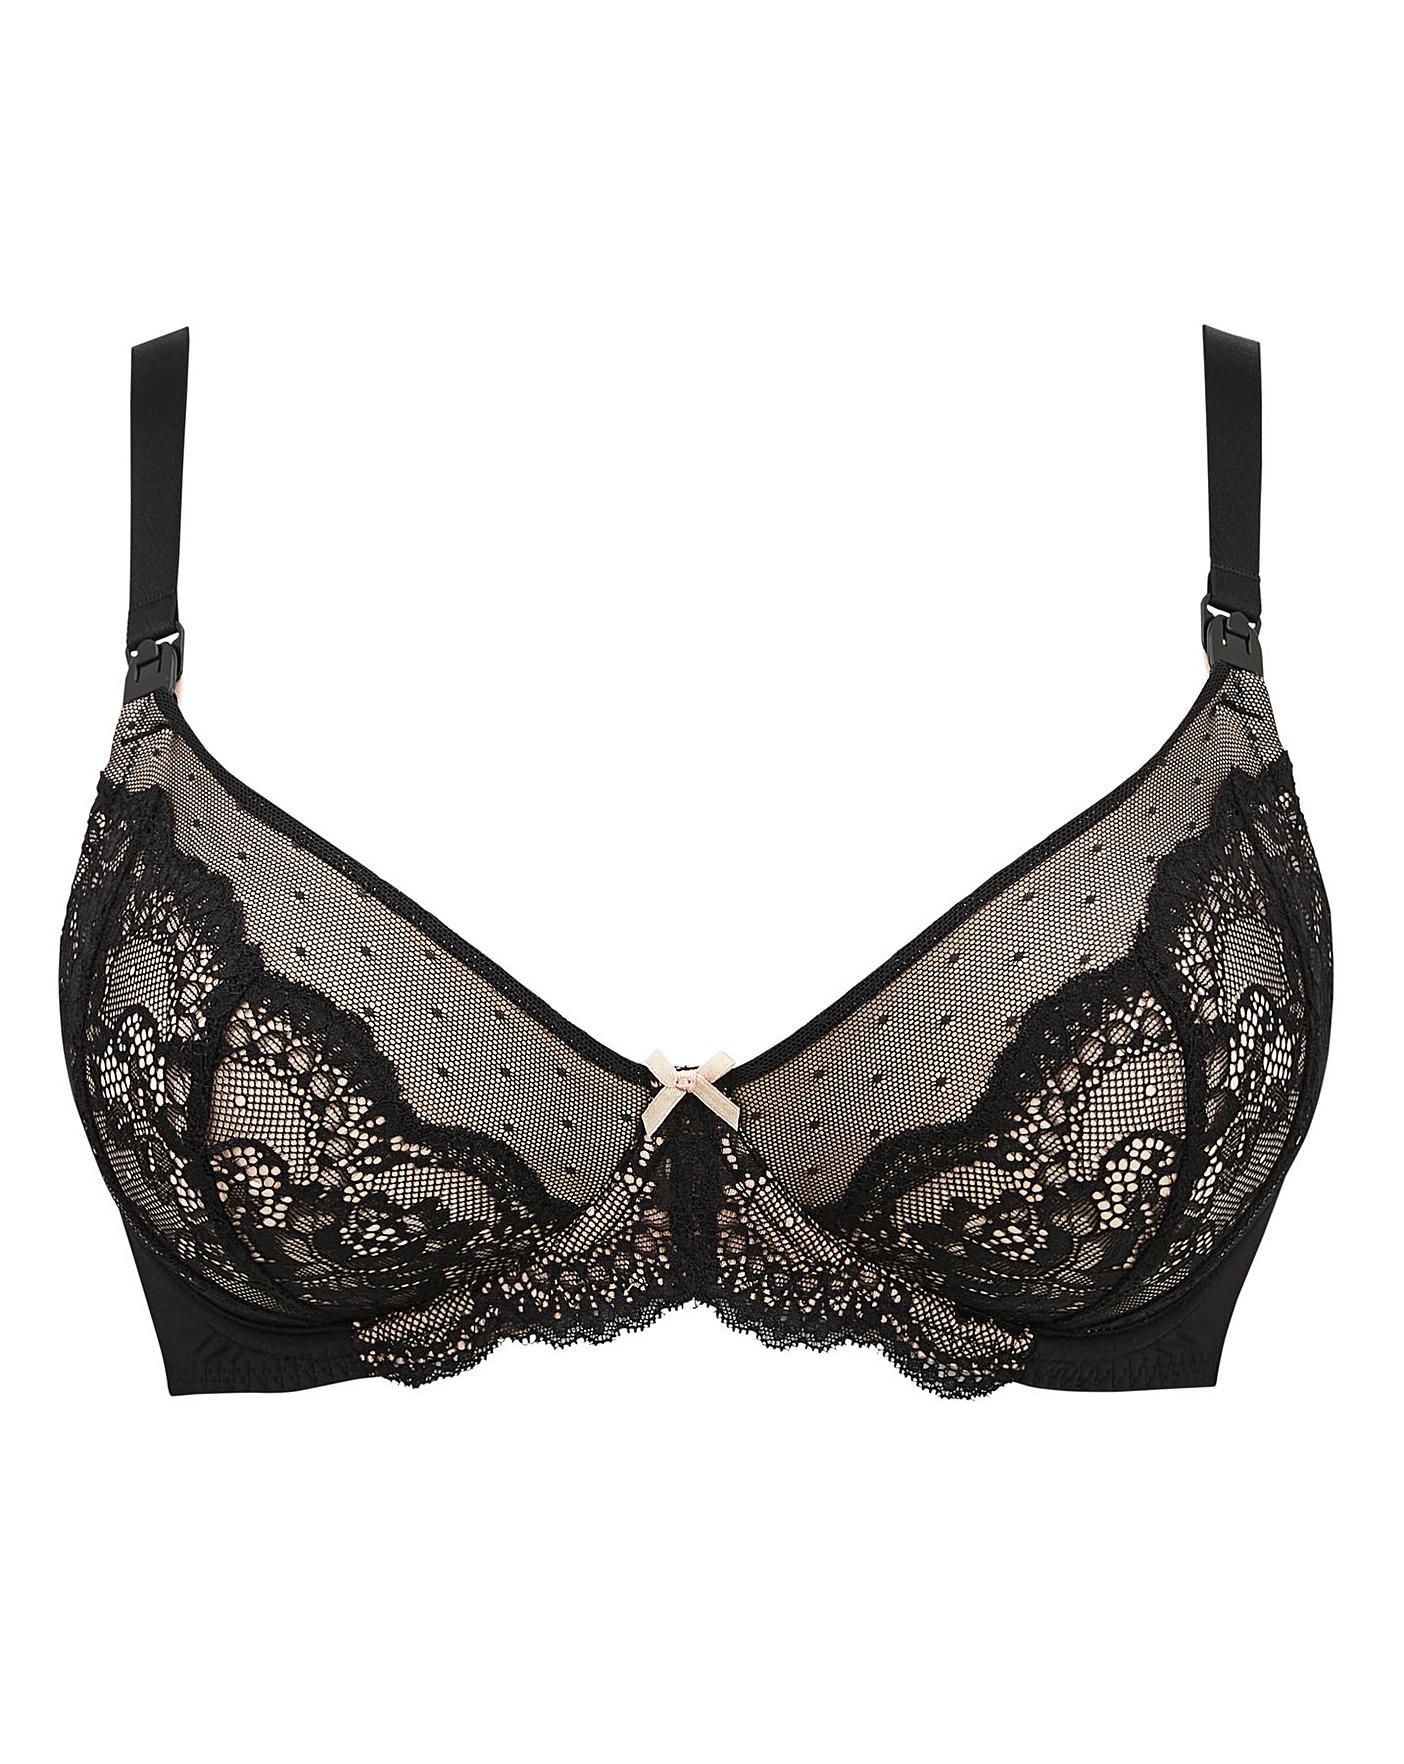 Figleaves Juliette Padded & Non-Padded Bra Reviews: 32GG - Big Cup